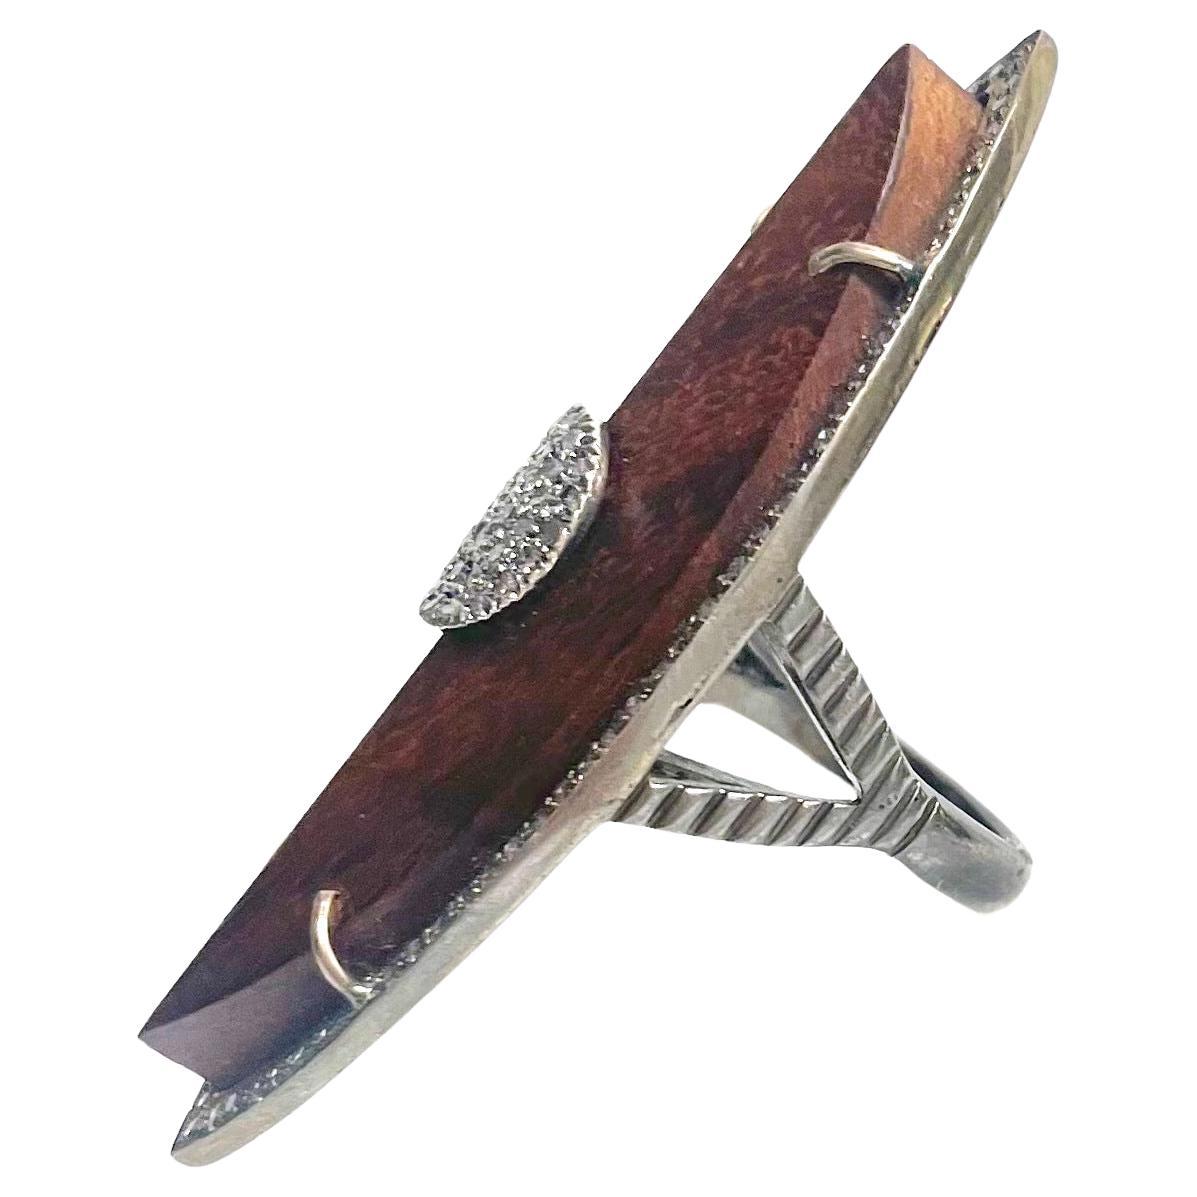 Description
You won’t go unnoticed showcasing this large one-of-a-kind statement fashion ring. 
The depth and richness of the brown hand-carved wood harmoniously joins the muted color of the diamond setting making it easy to wear anywhere! Whether